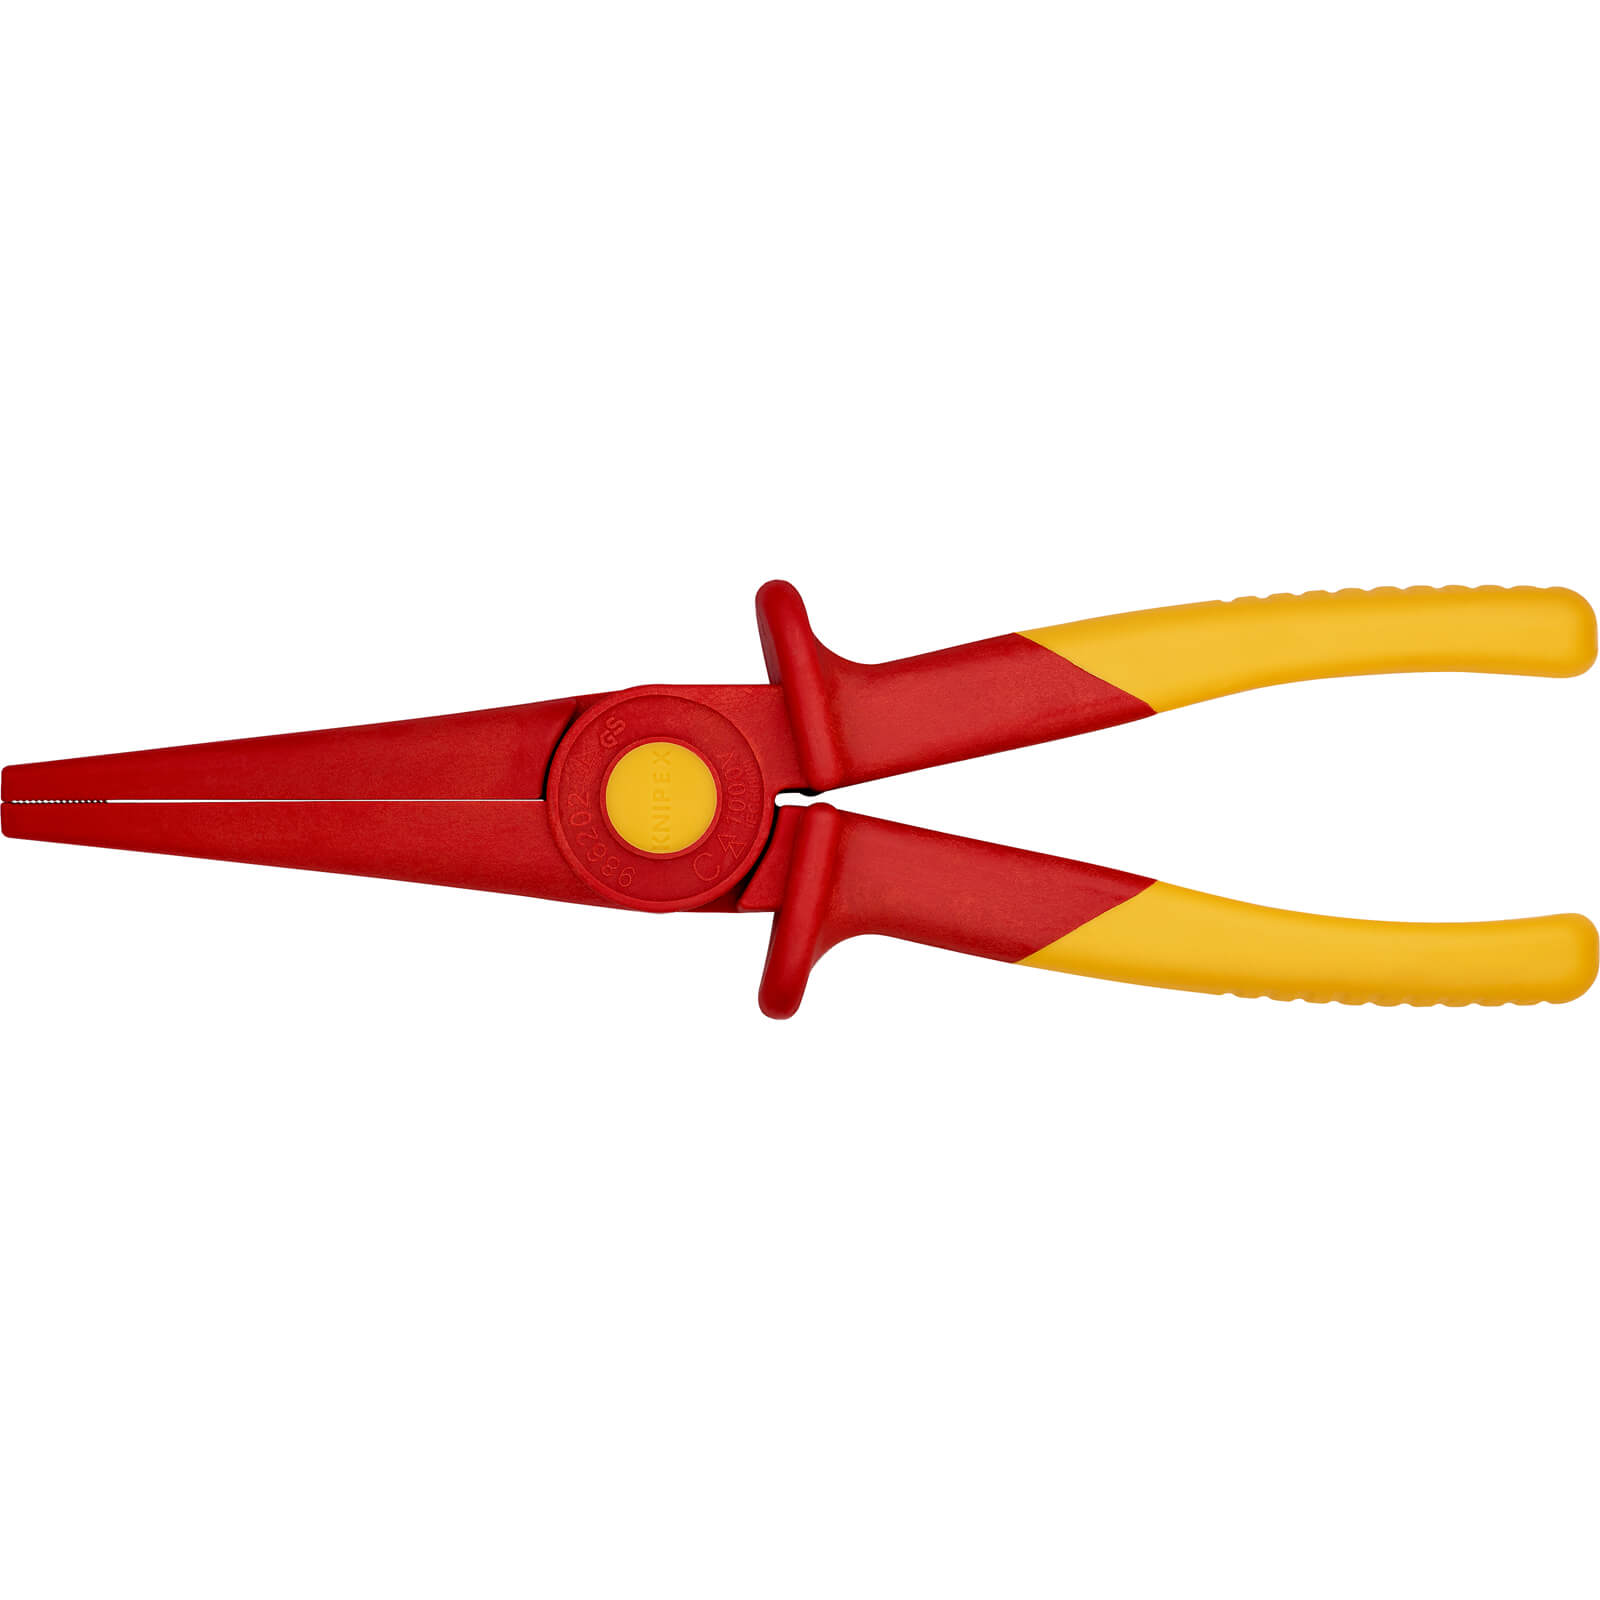 Image of Knipex 98 62 VDE Fully Insulated All Plastic Snipe Long Nose Pliers 220mm